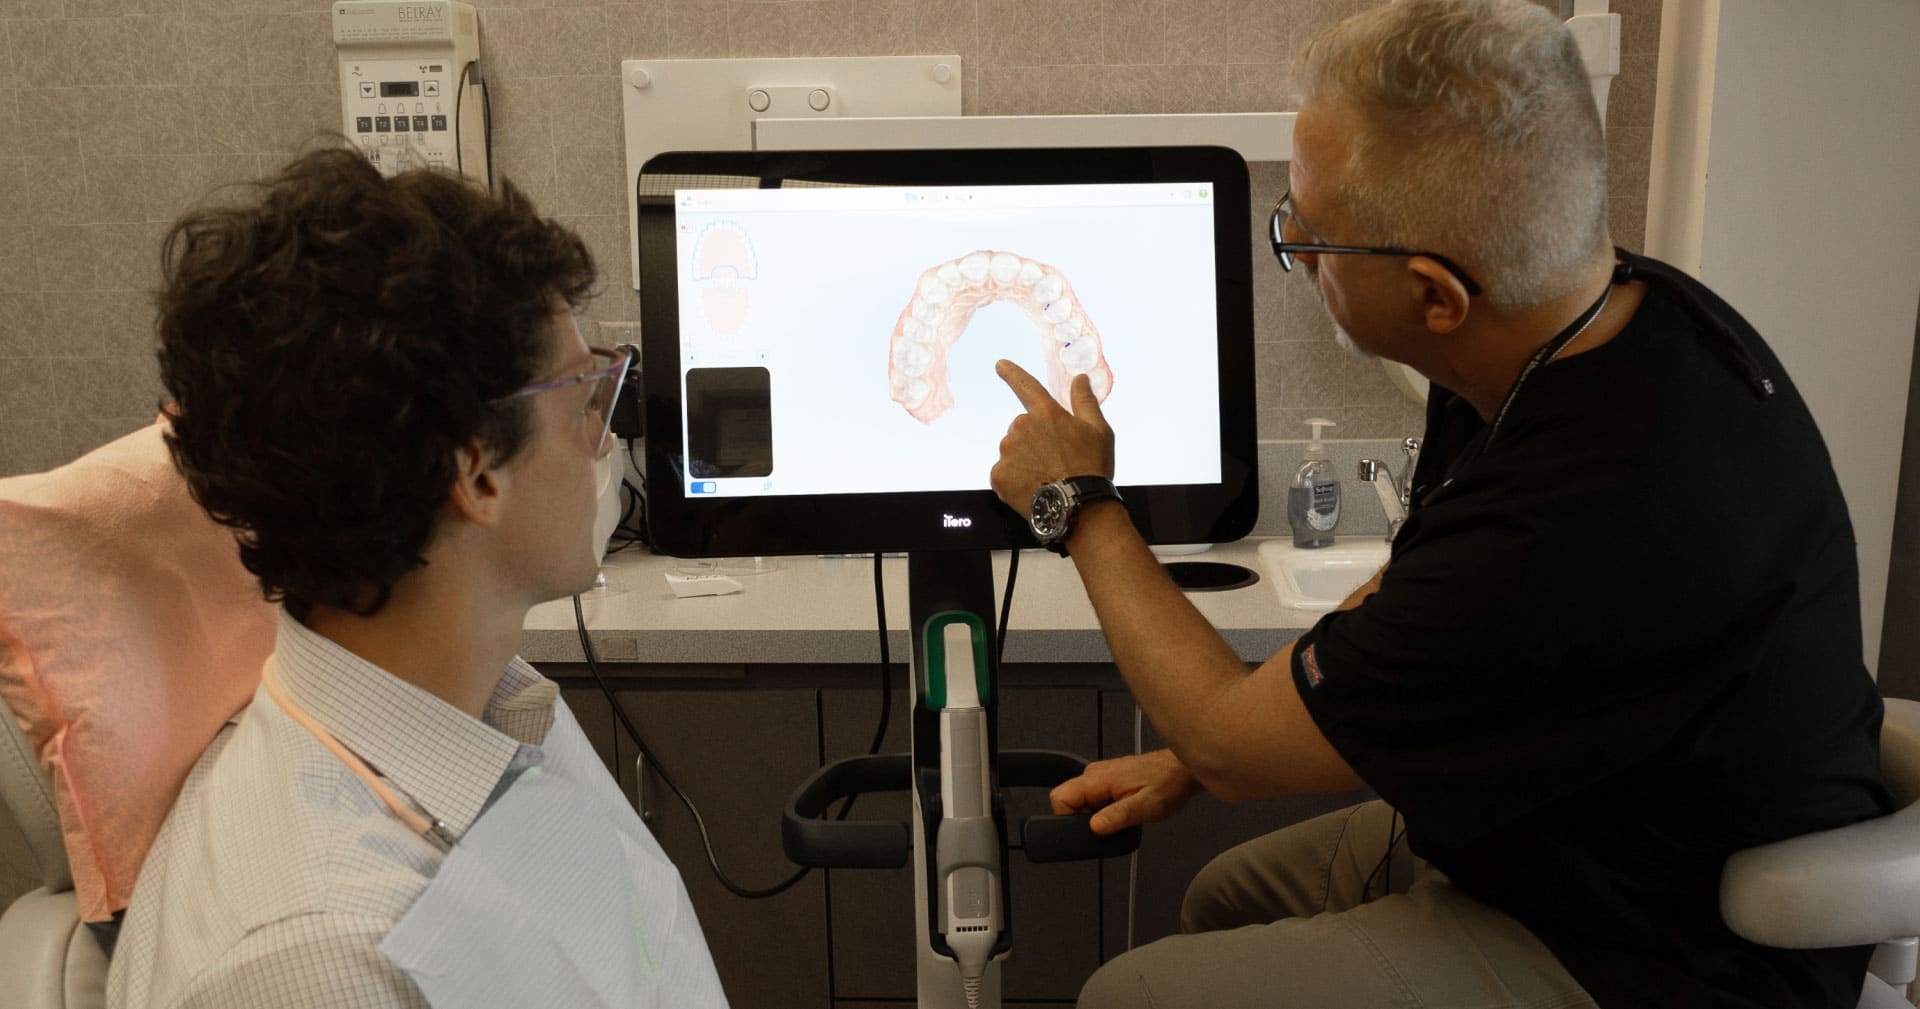 dr. goodman showing dental image to patient